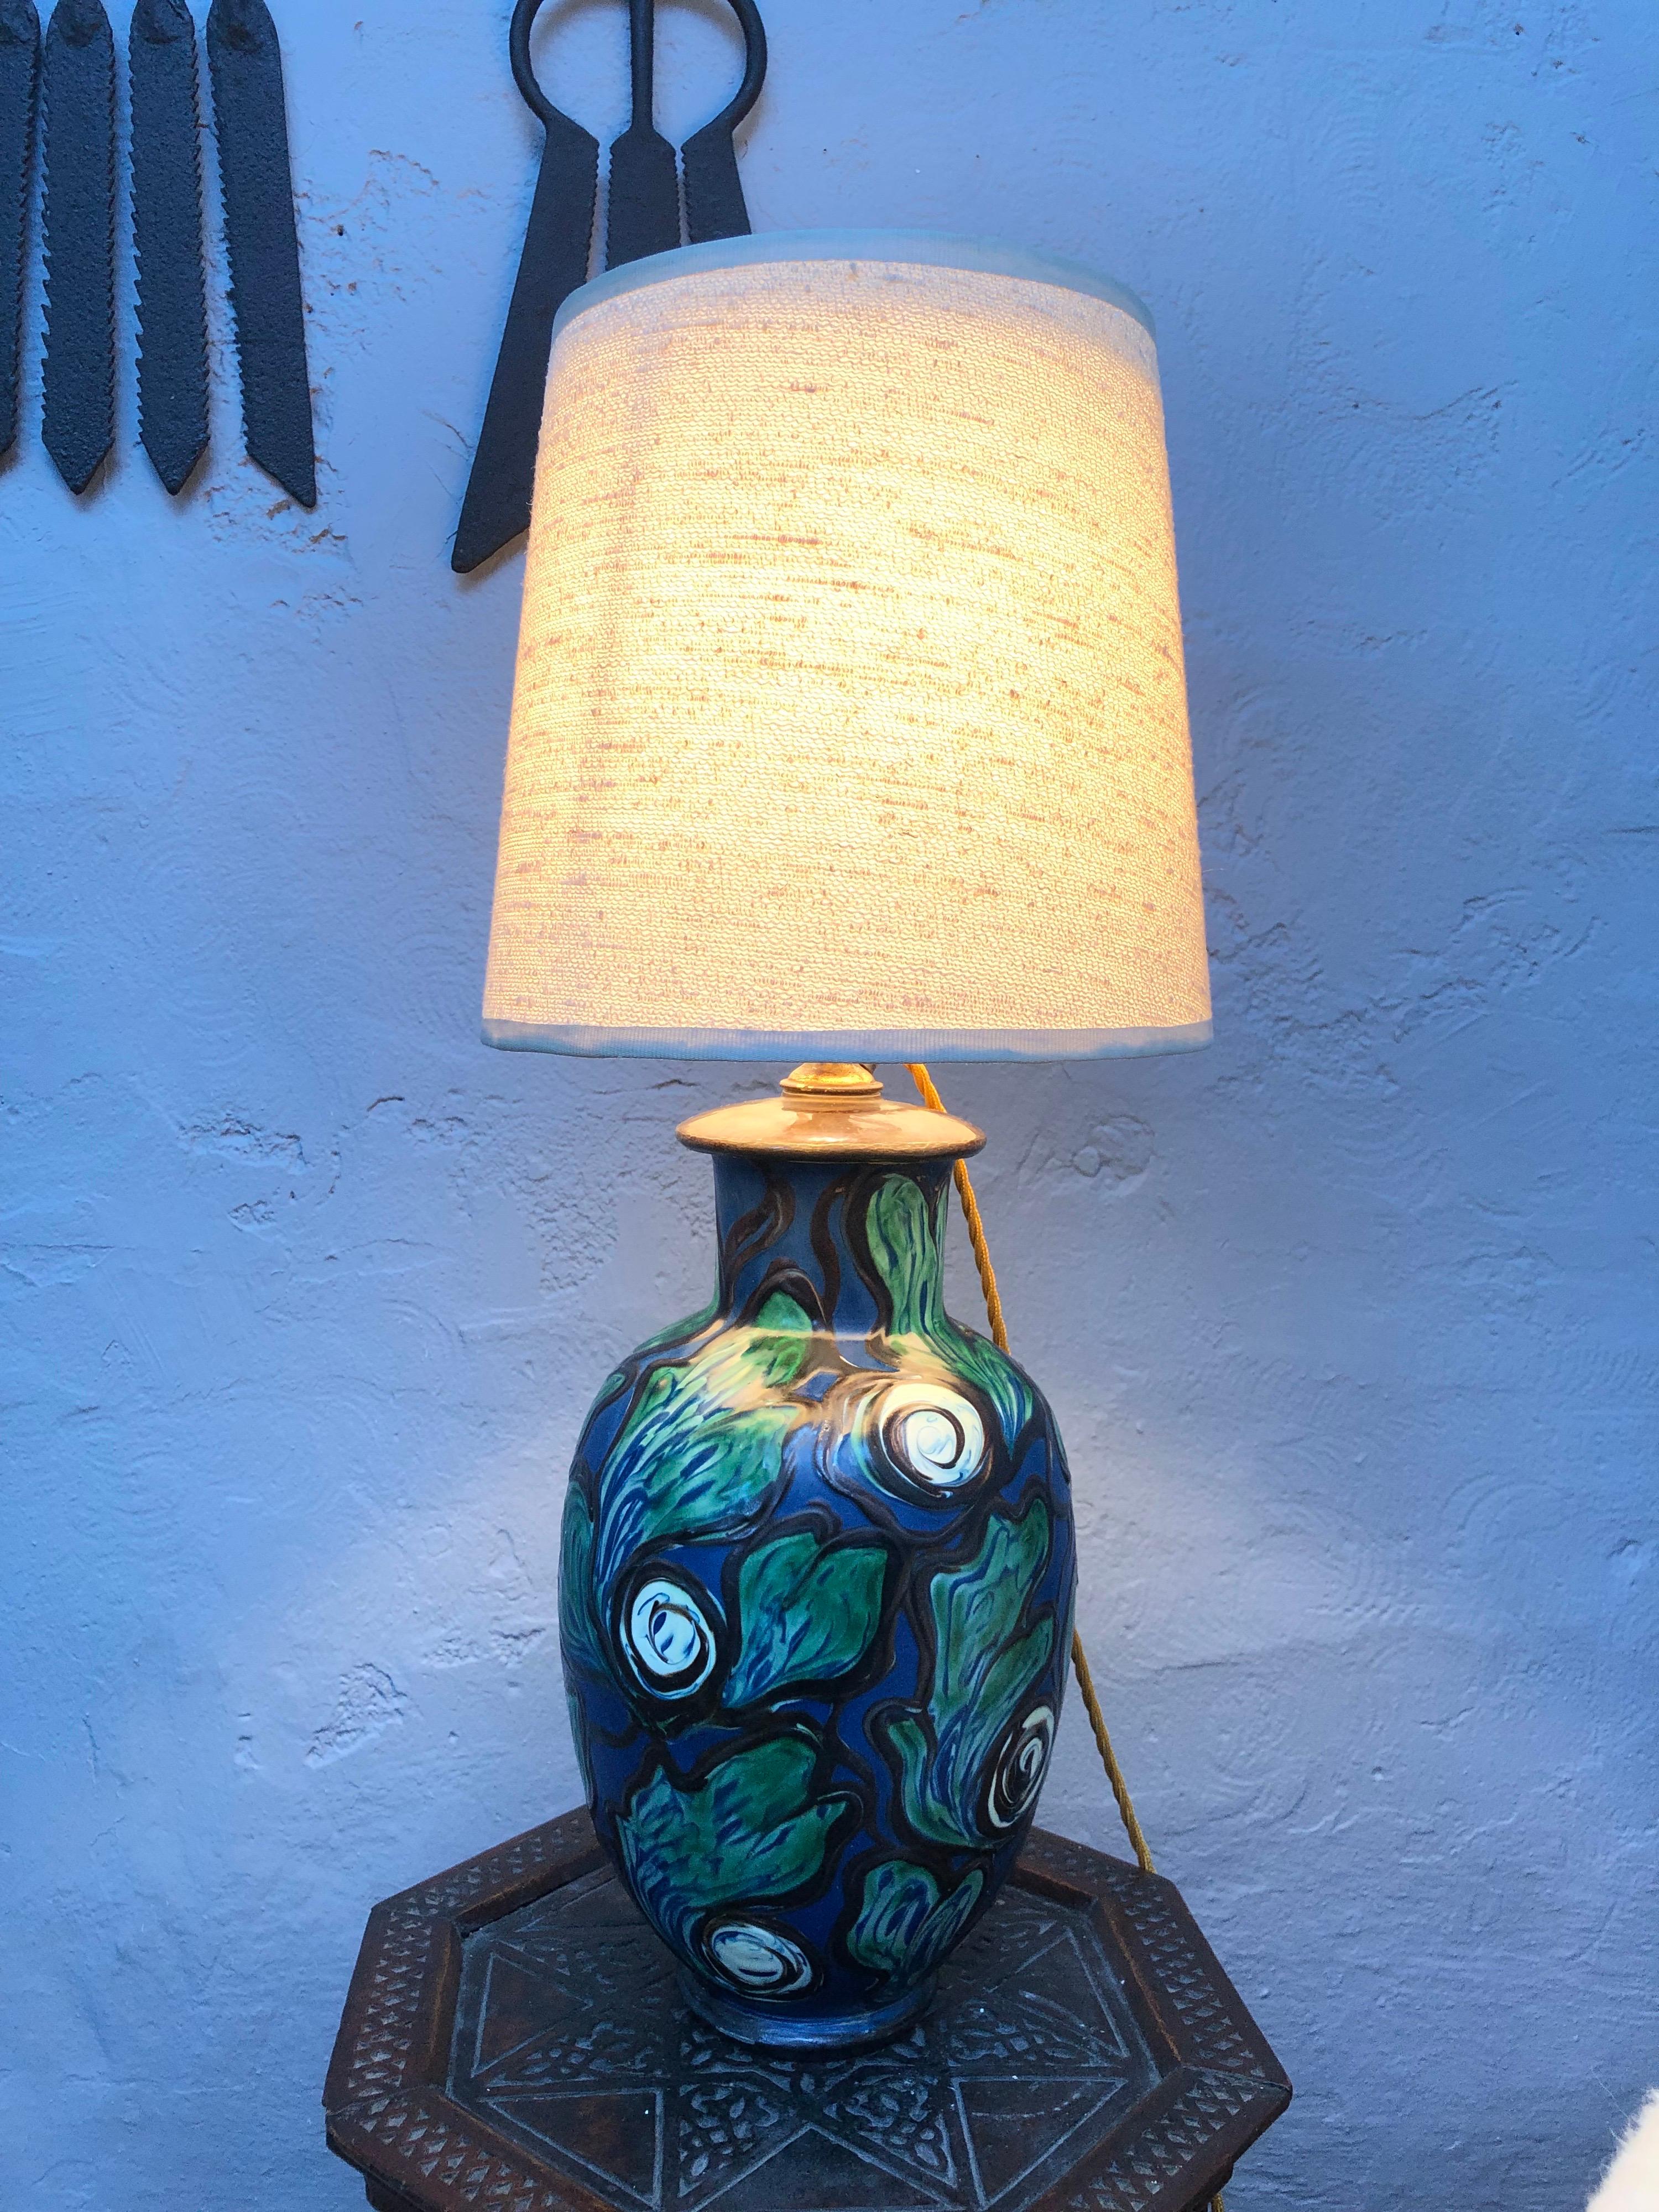 A large antique Art Nouveau painted pottery table lamp from the 1910s..
In great condition with no cracks or chips 
Still with all its original lamp parts such as the brass and ceramic bulb holder. 
Rewired with a gold twisted cloth flex and